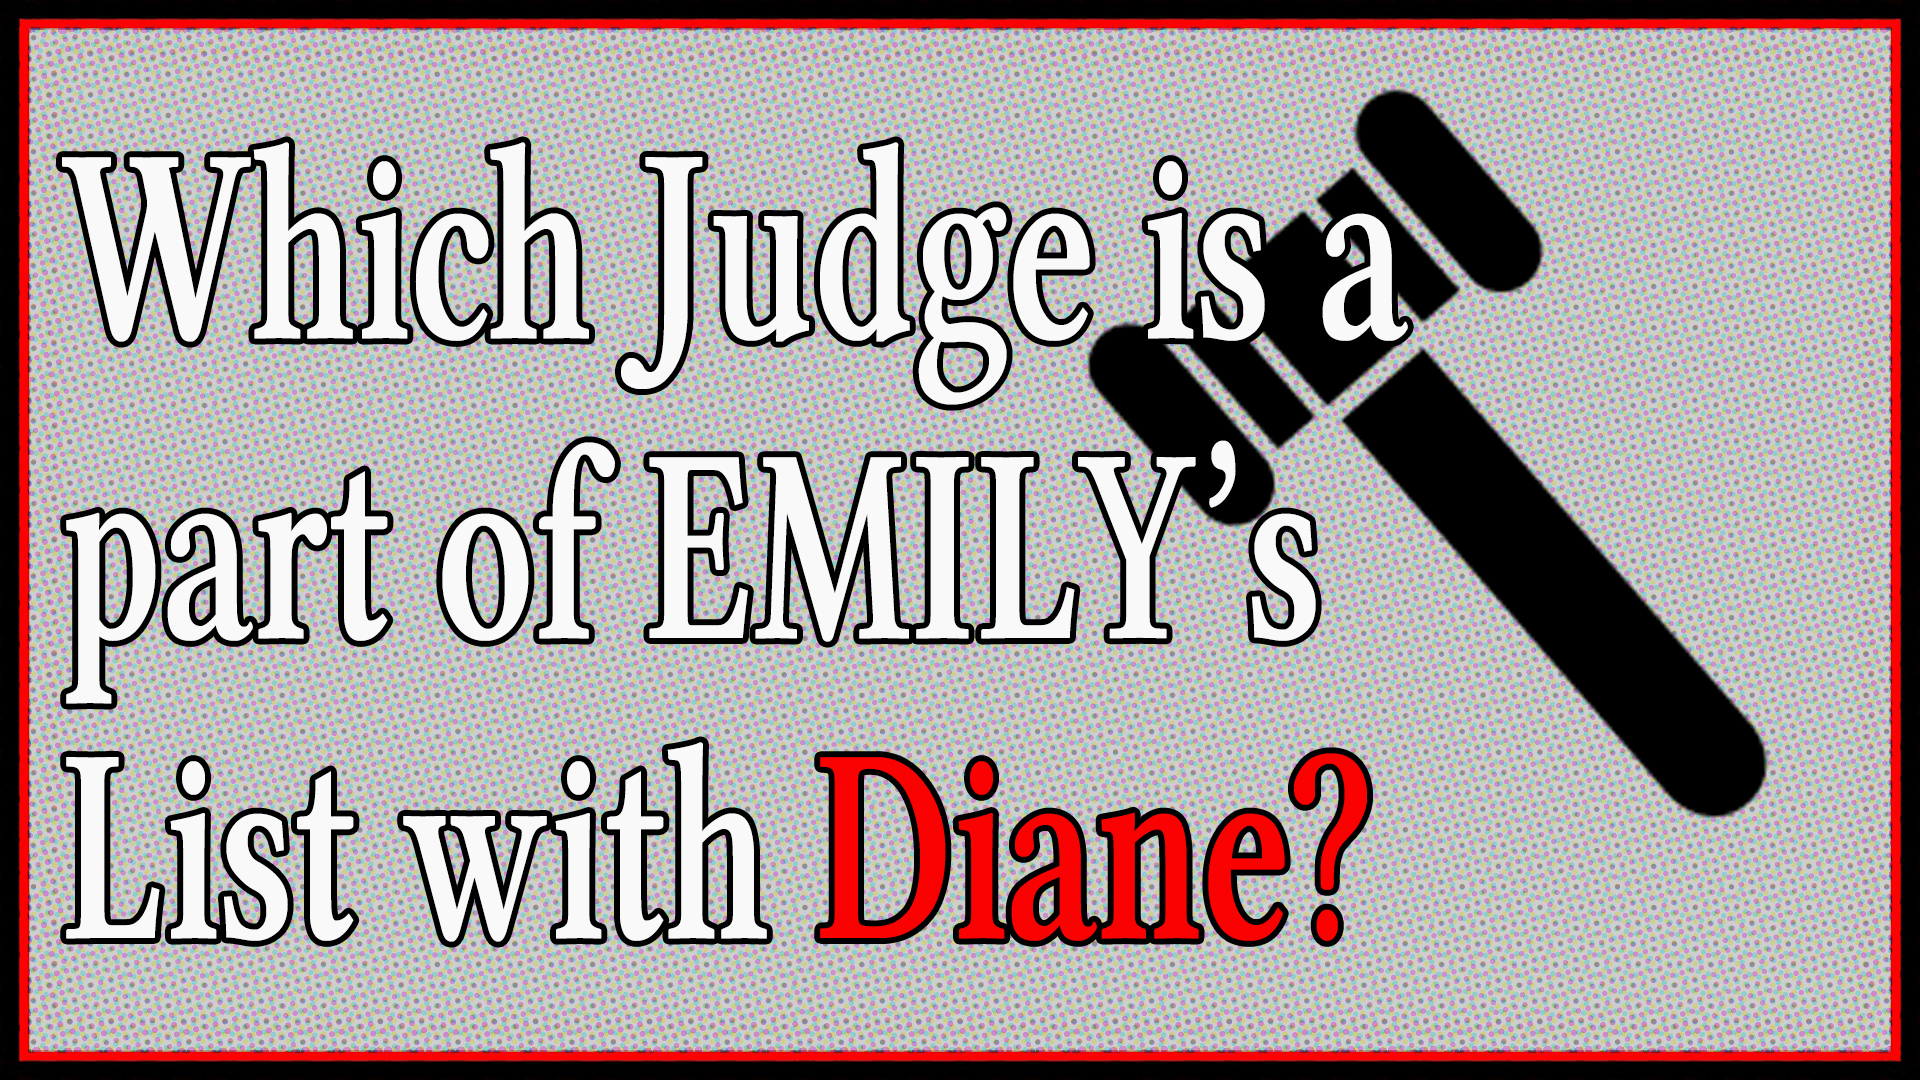 Which judge is a part of EMILY's List with Diane?